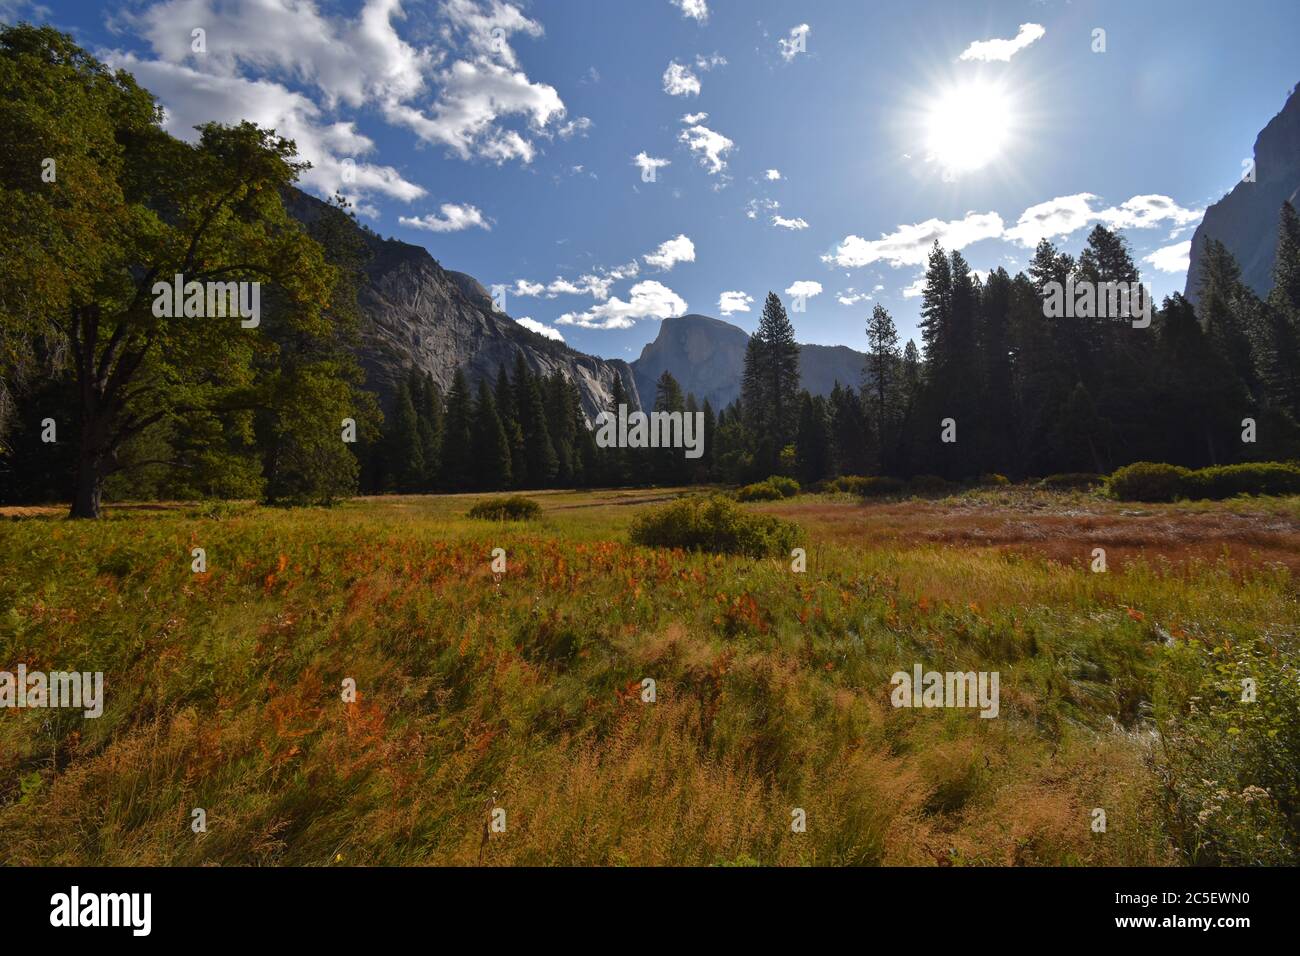 Meadow in Yosemite Valley with Half Dome rock formations in the distance. Fall / Autumn colours with red and yellow grasses in the meadow. Stock Photo